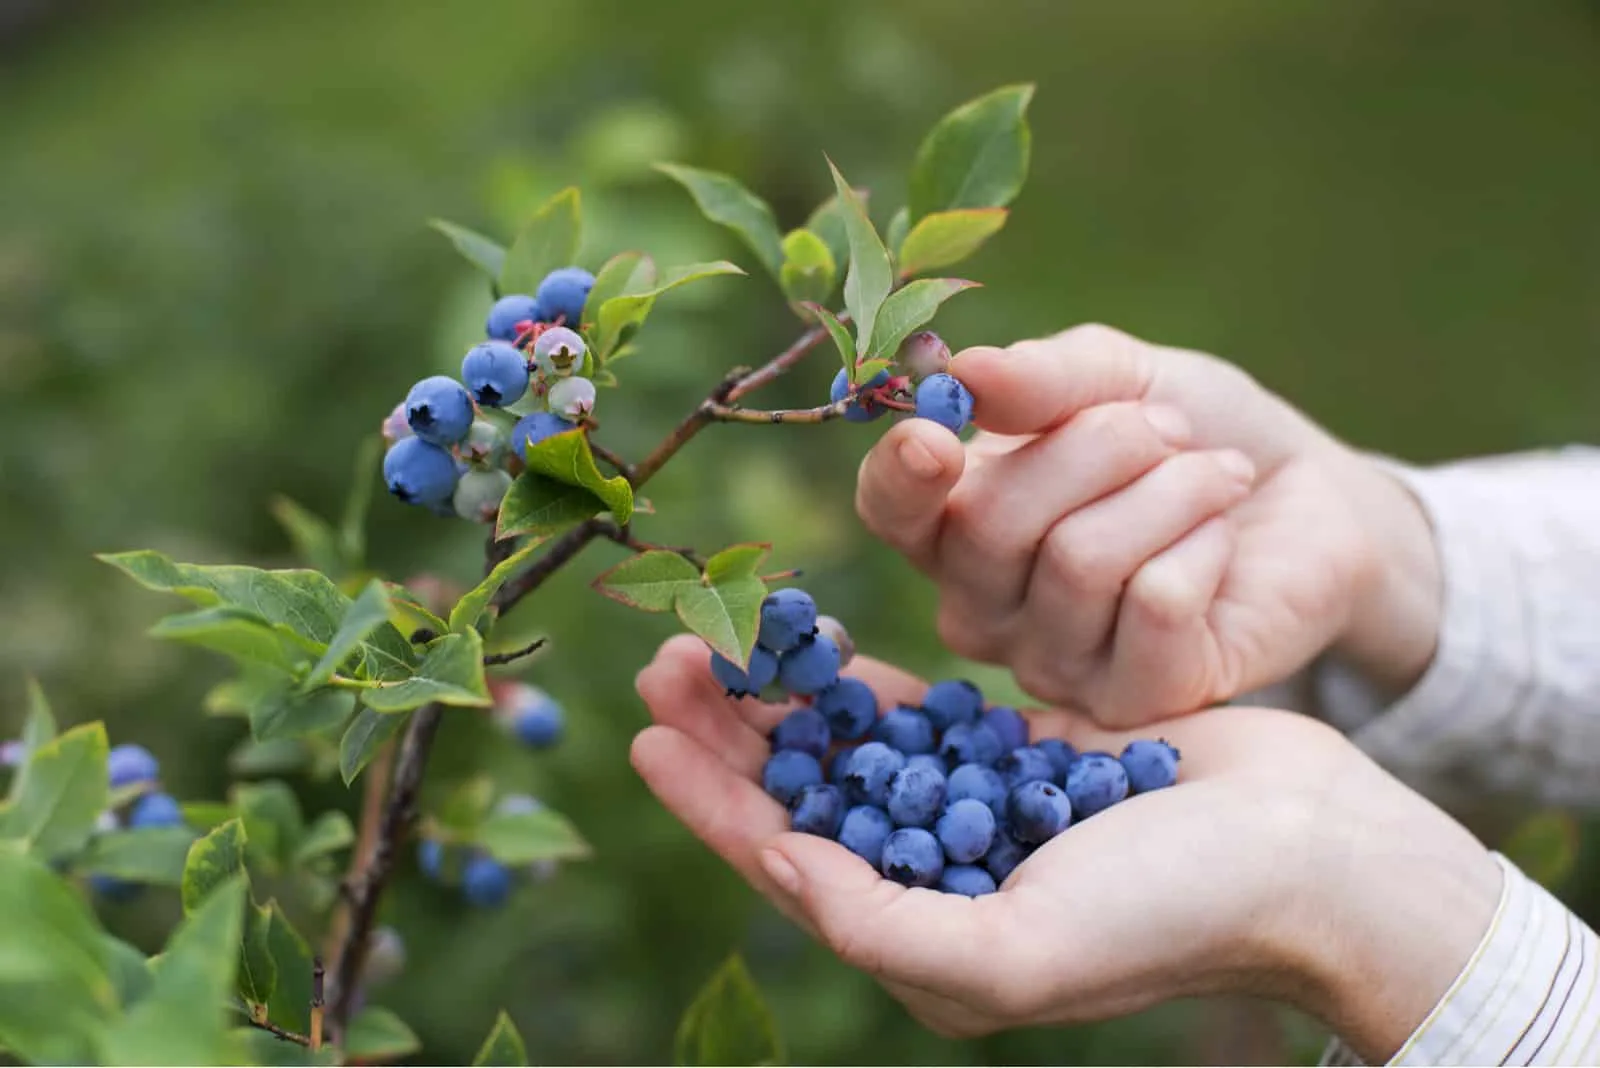 hands picking blueberries from plant